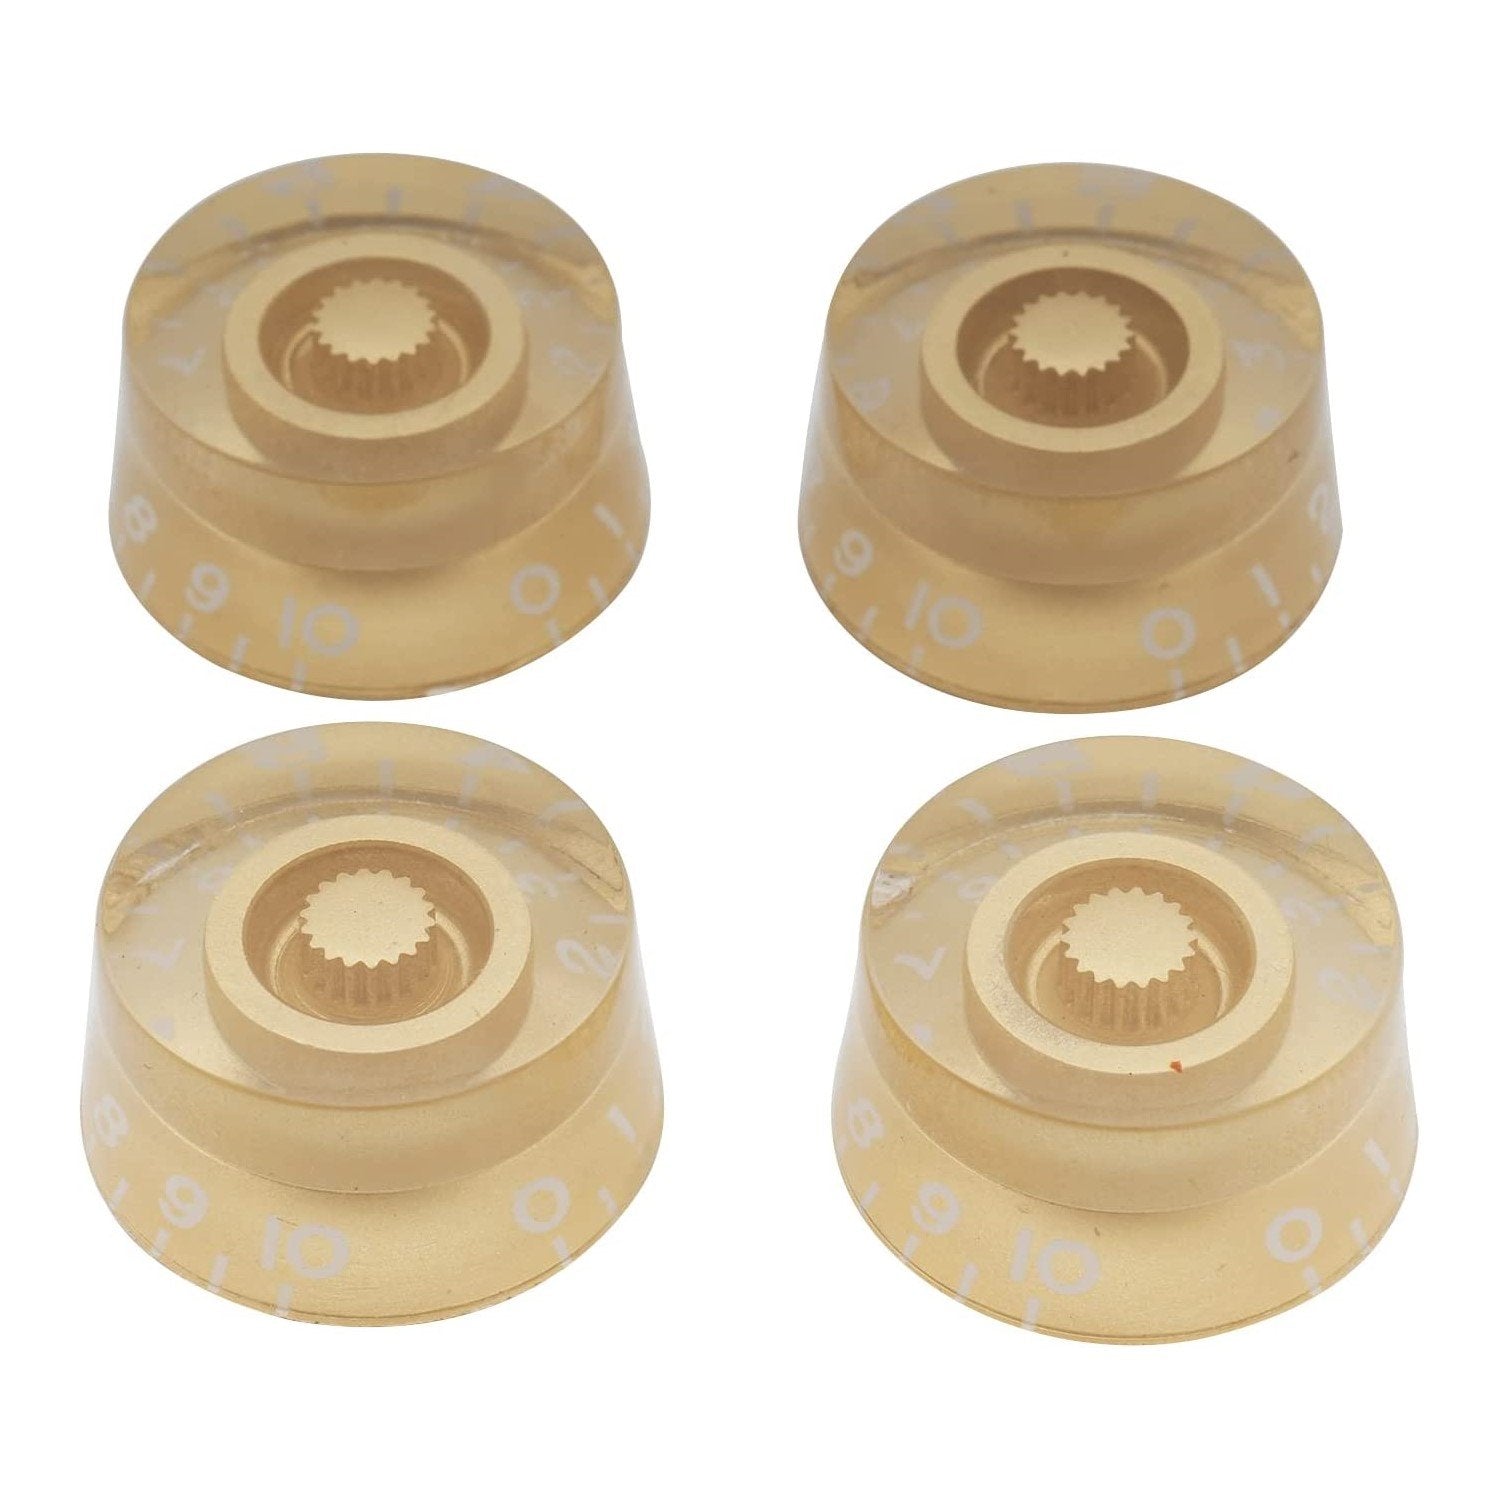 Metric Speed Guitar Knobs for Les Paul